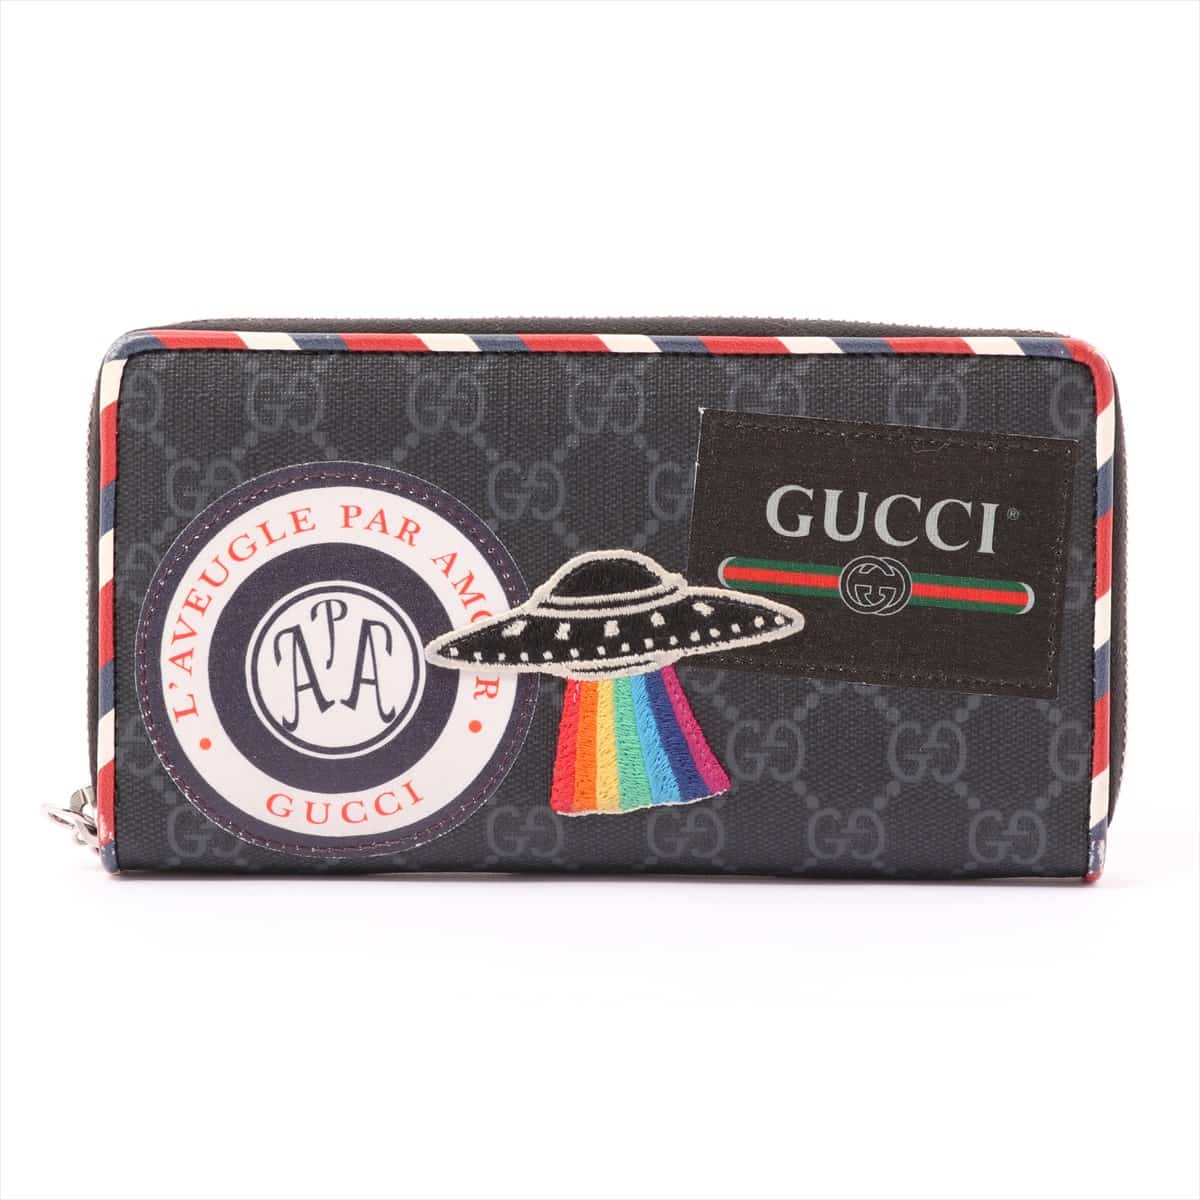 Gucci GG Supreme Courier 496342 Leather Wallet Black